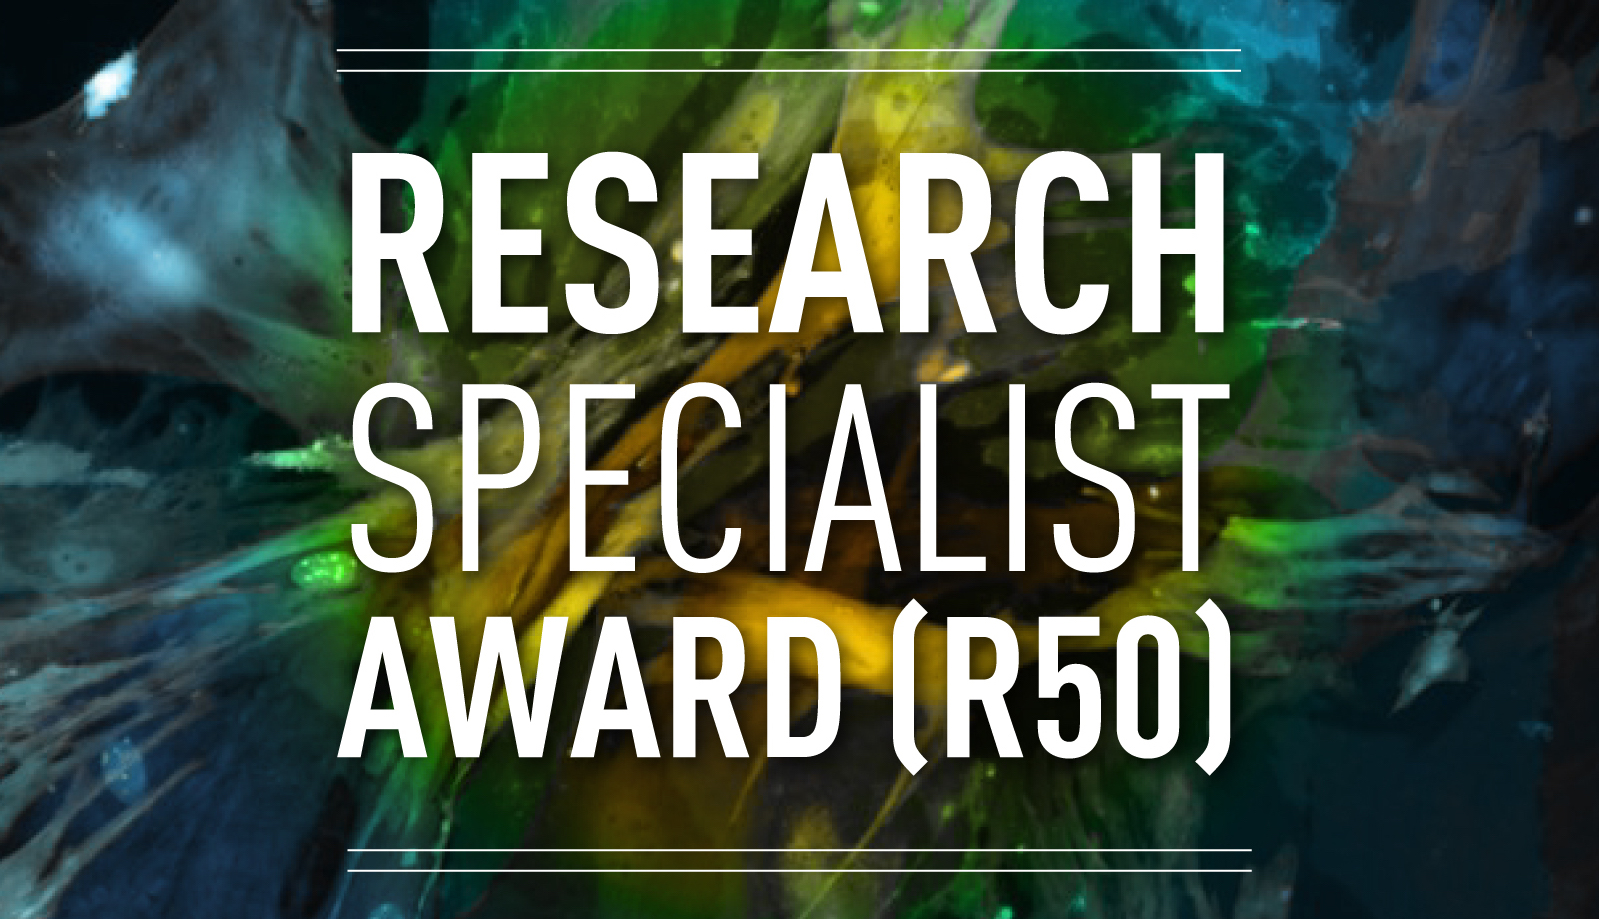 An advertisement for the Research Specialist Award (R50). A technical abstract background which is decorative with text overlaid reading: the Research Specialist Award (R50).